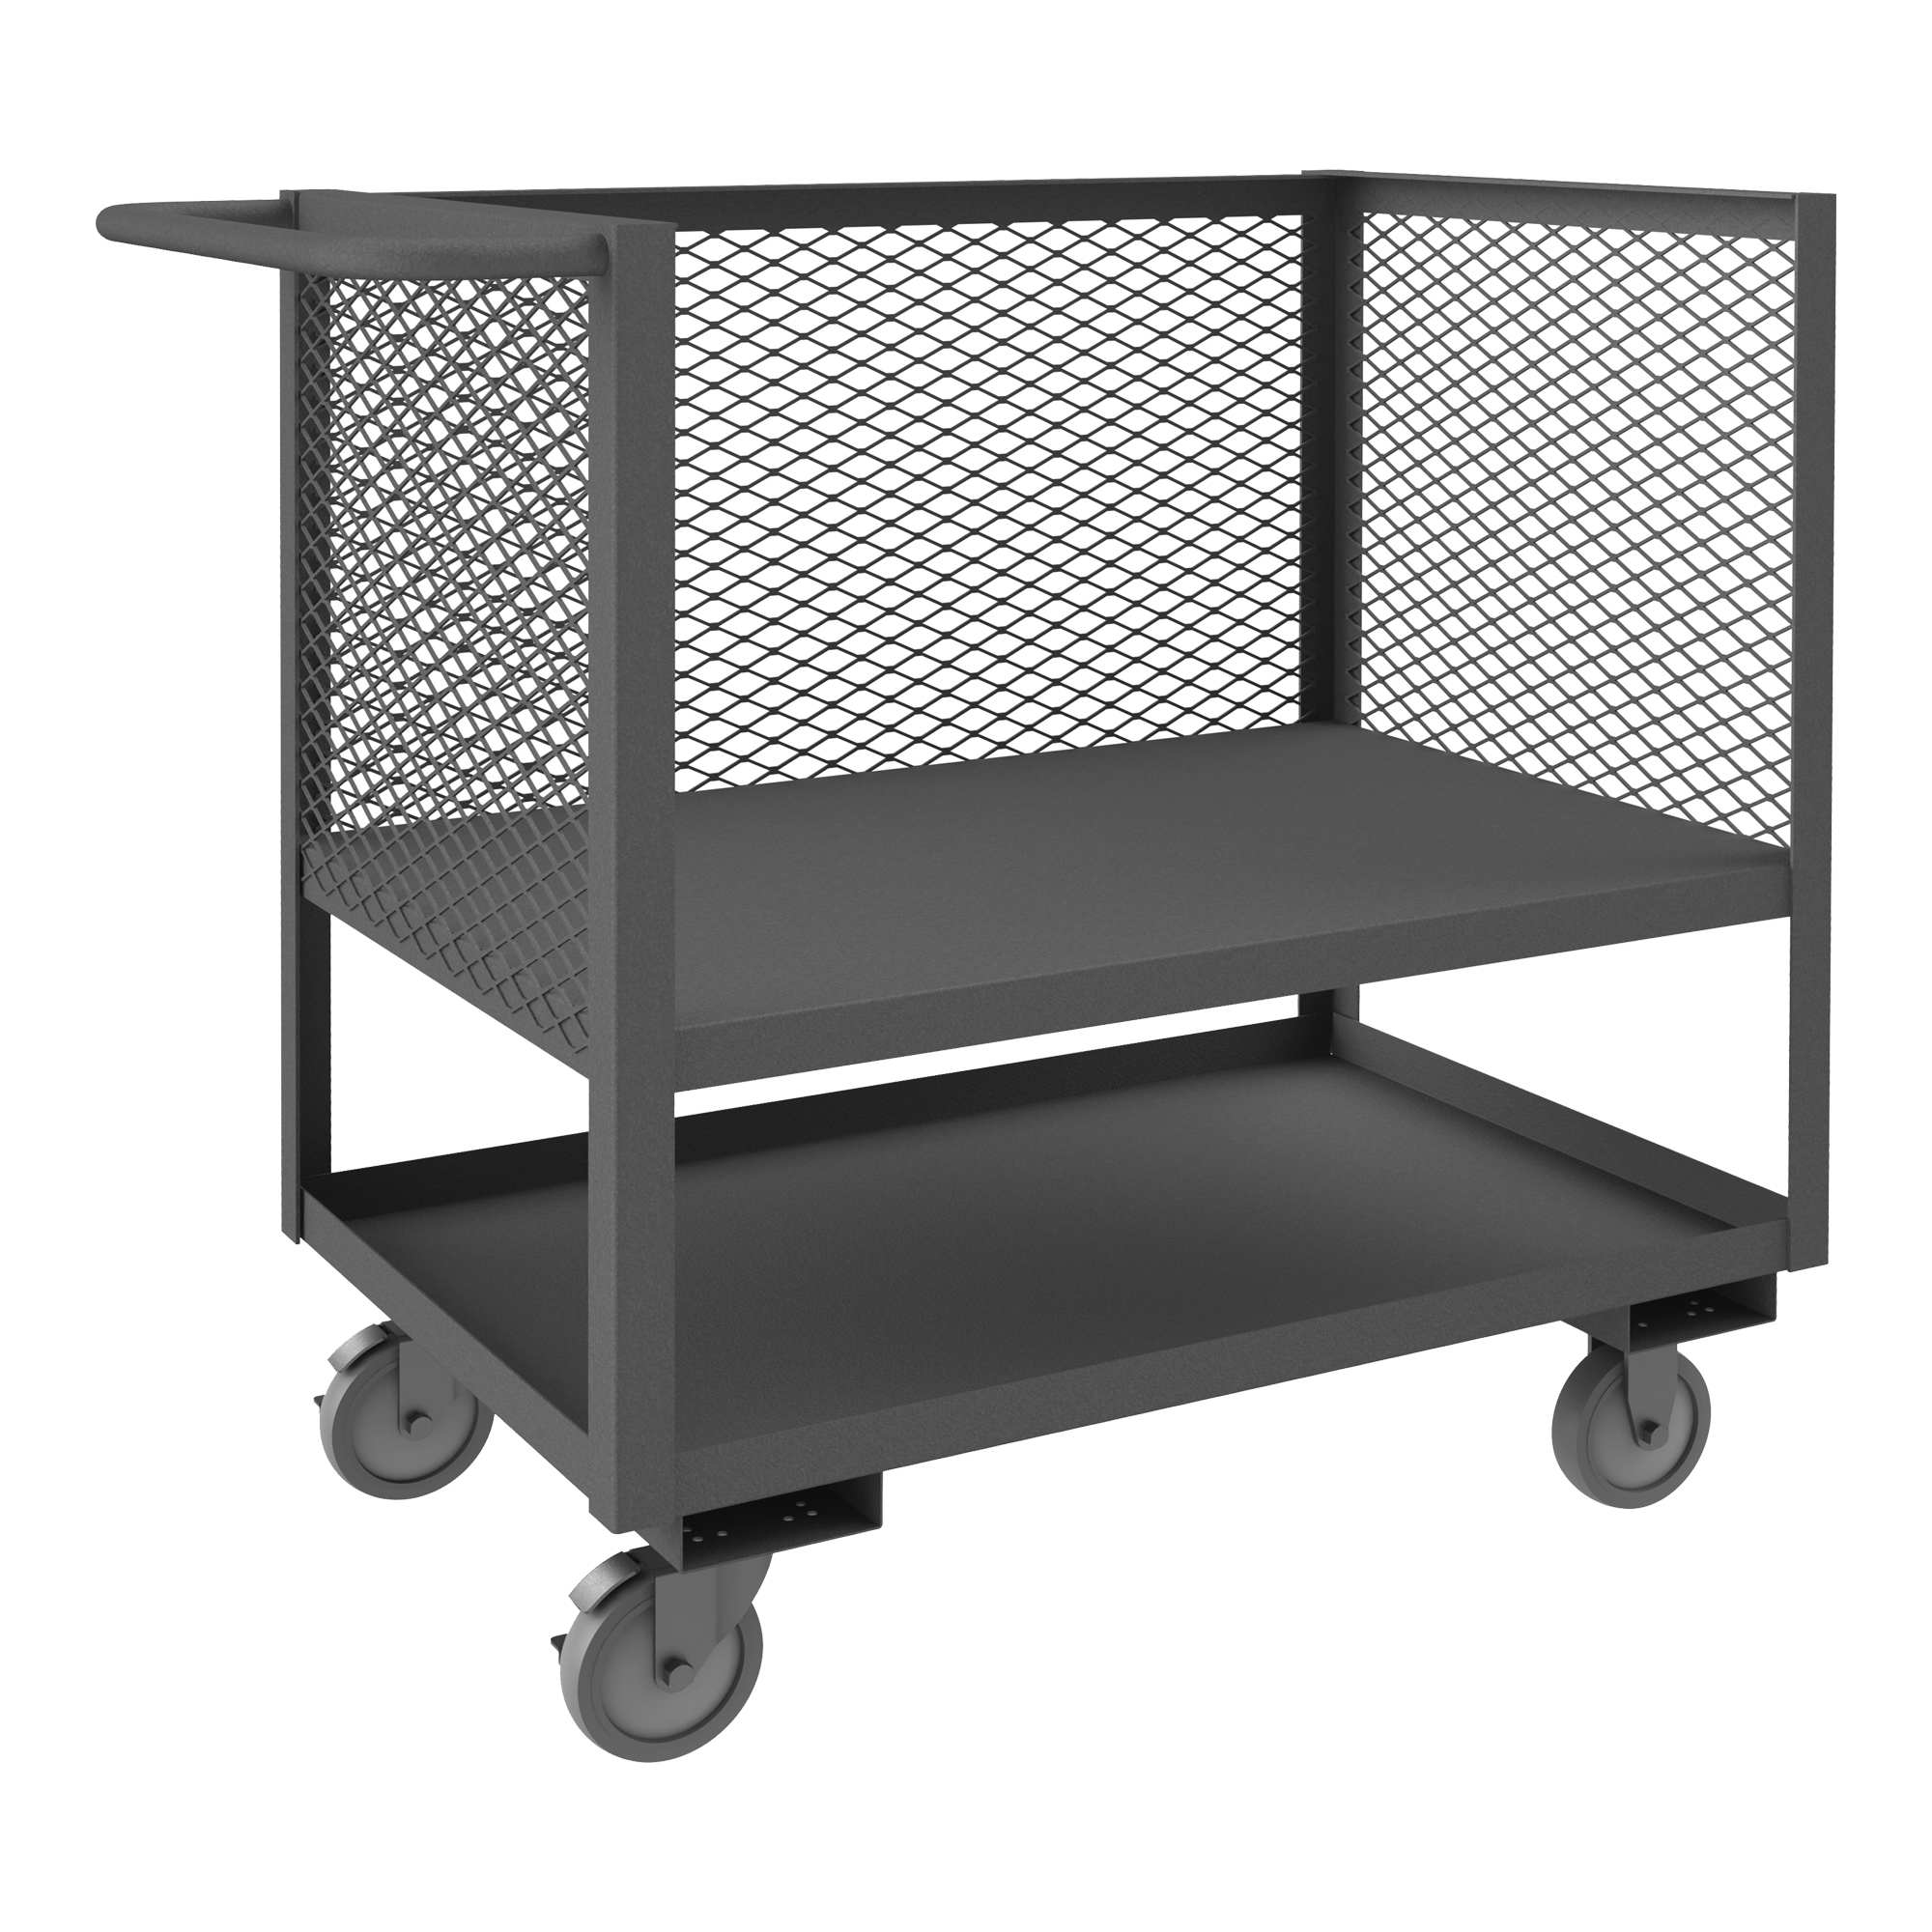 Durham 3 Sided Low Deck Truck with Mesh Sides